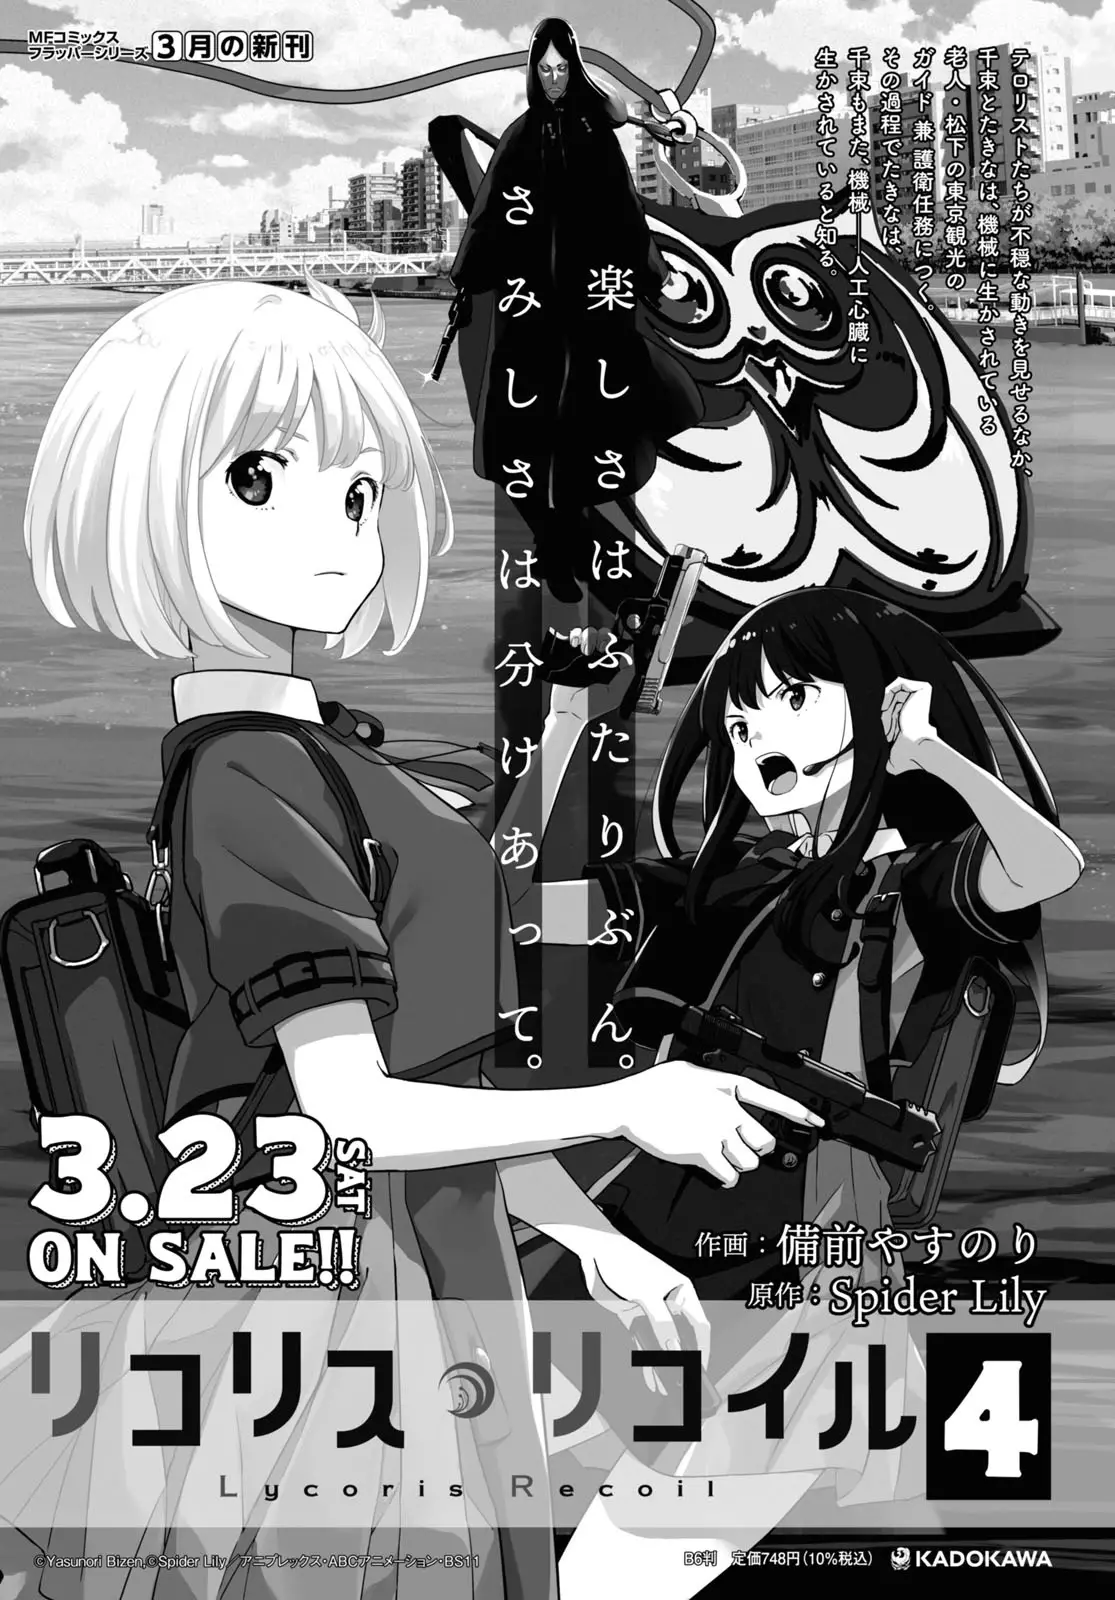 Lycoris Recoil - 19 page 20-8aed2af2